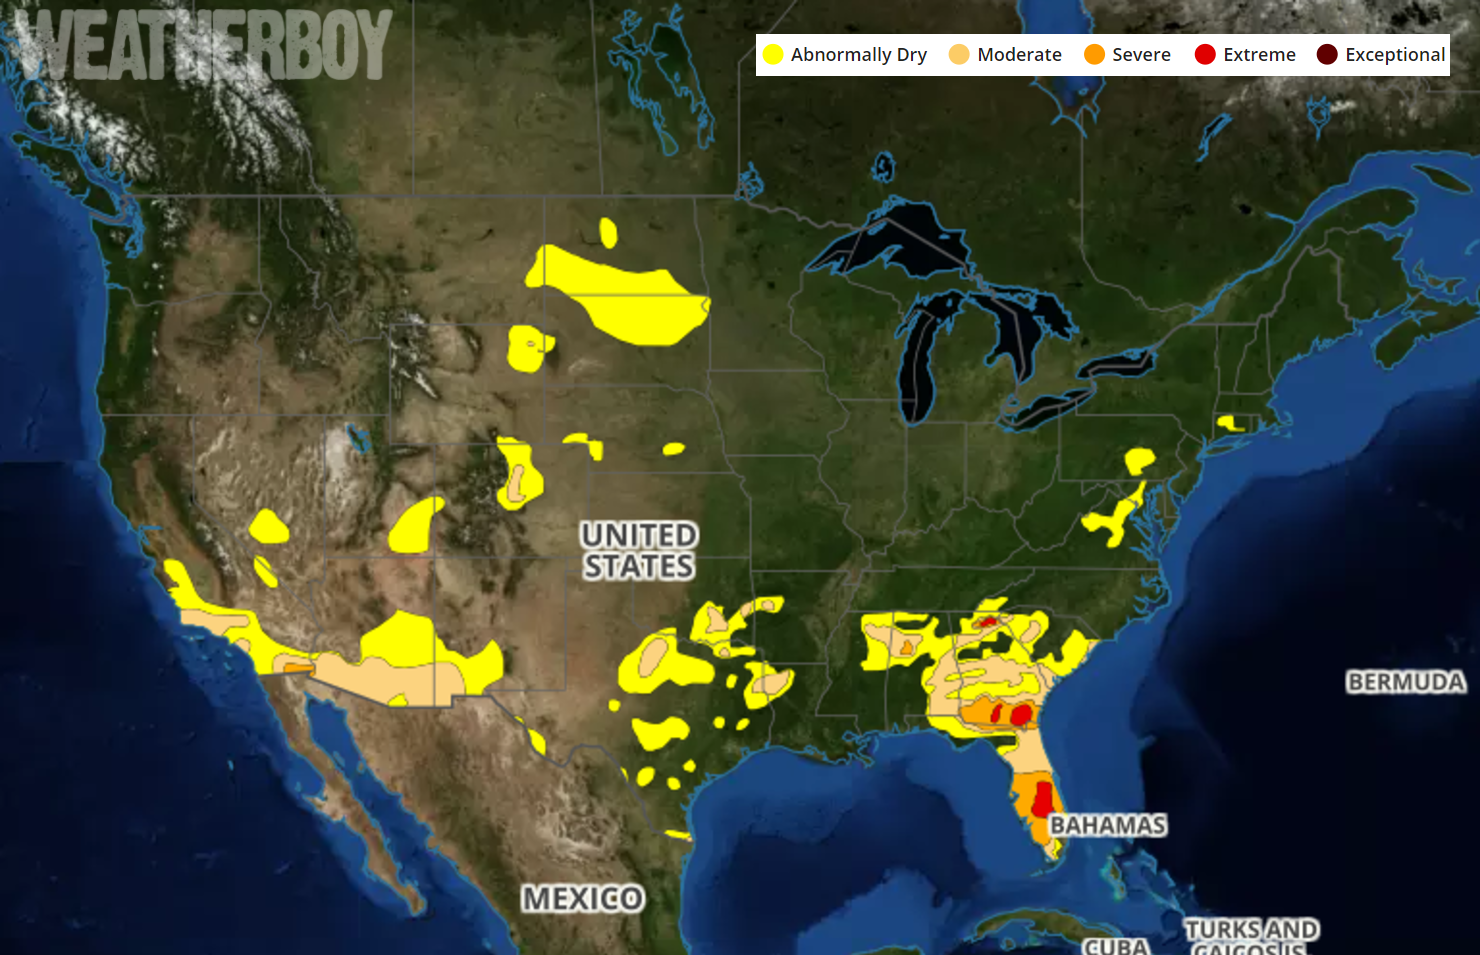 Current Drought Monitor Map, as shown on Weatherboy.com